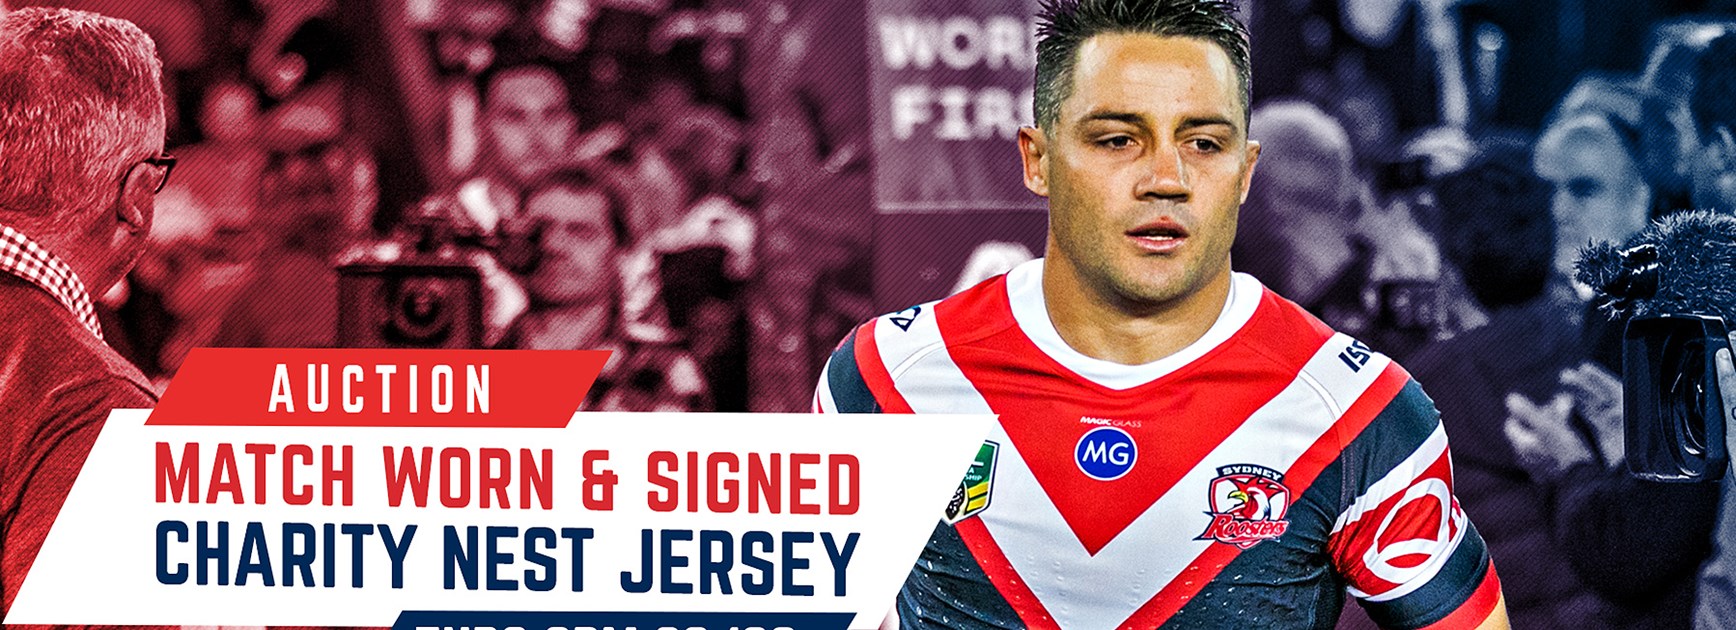 Charity Nest Jerseys Available At Auction Now